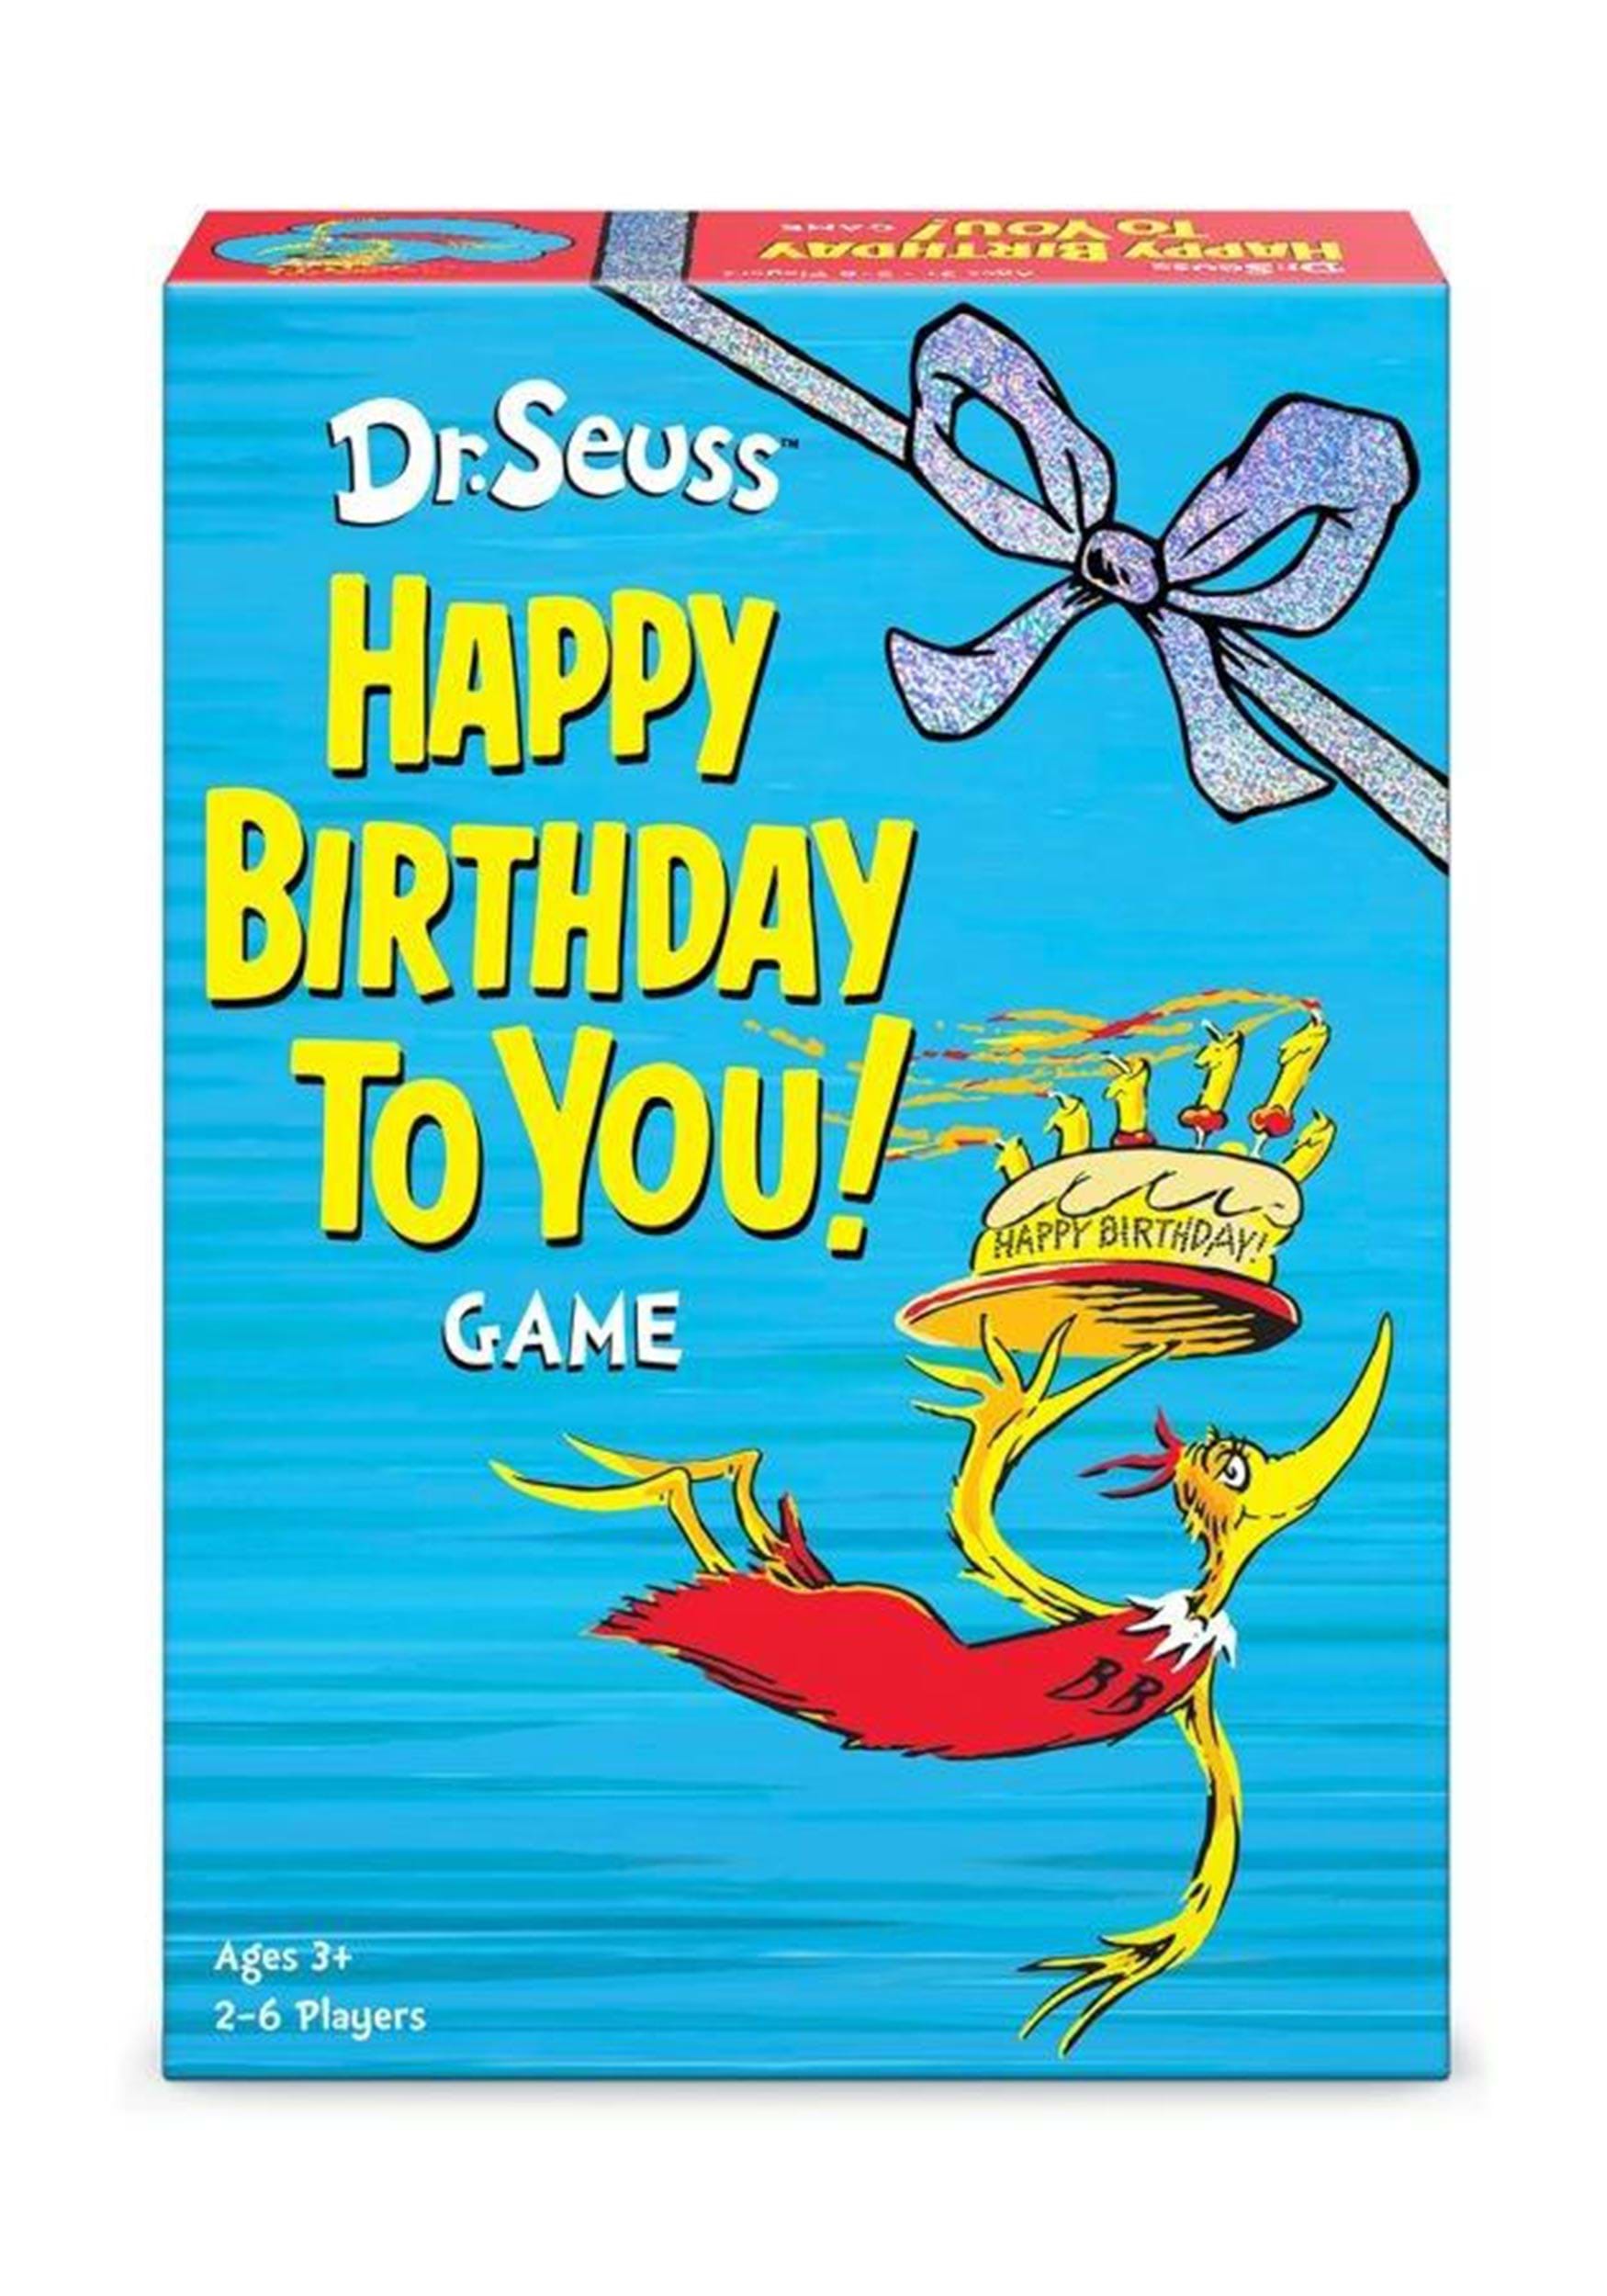 Signature Board Games: Dr. Seuss Happy Birthday to You! Game